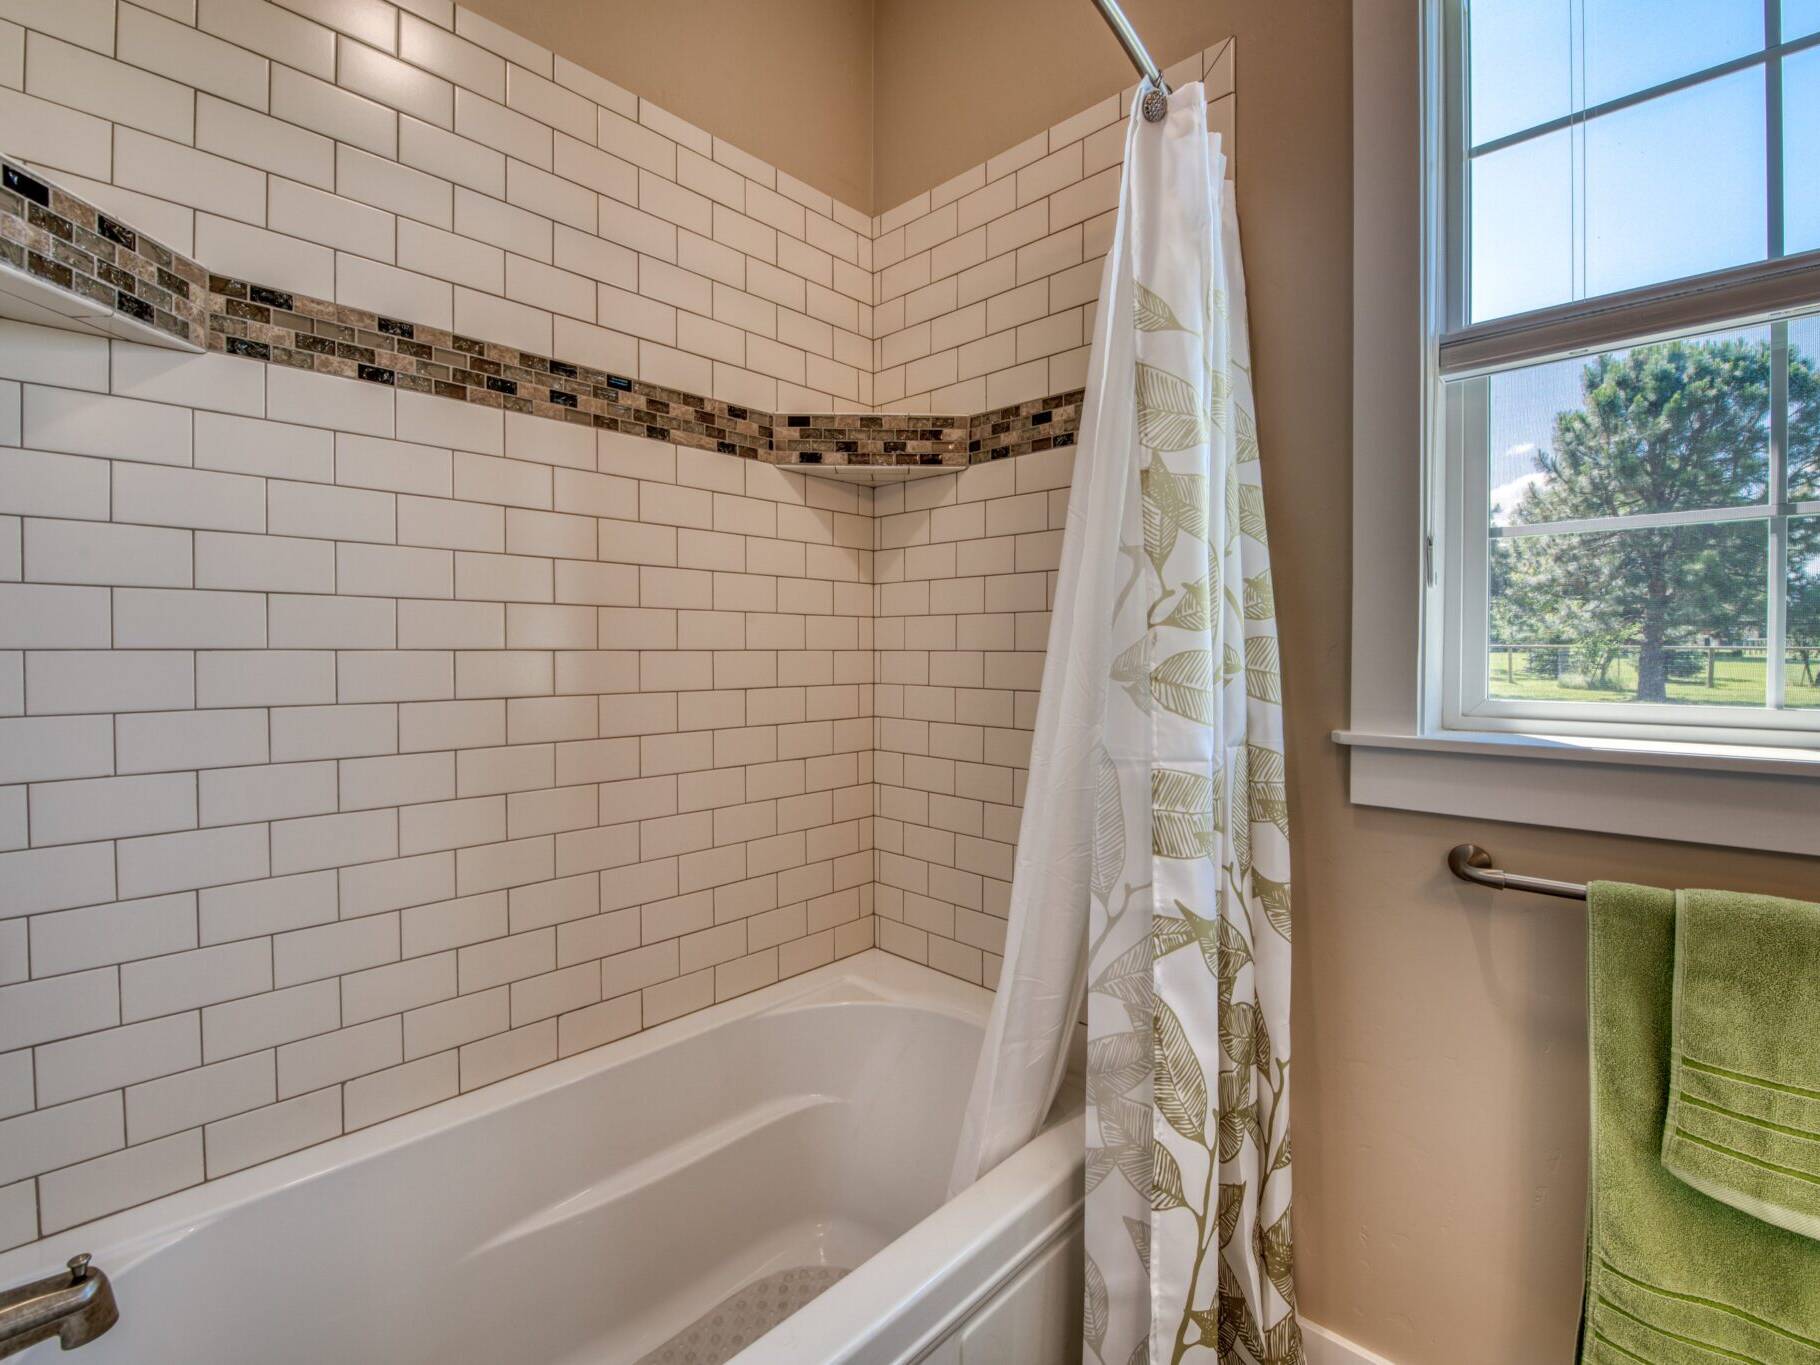 Bathroom tub/shower with tile surround in a custom home built by Big Sky Builders of Montana in Hamilton, MT